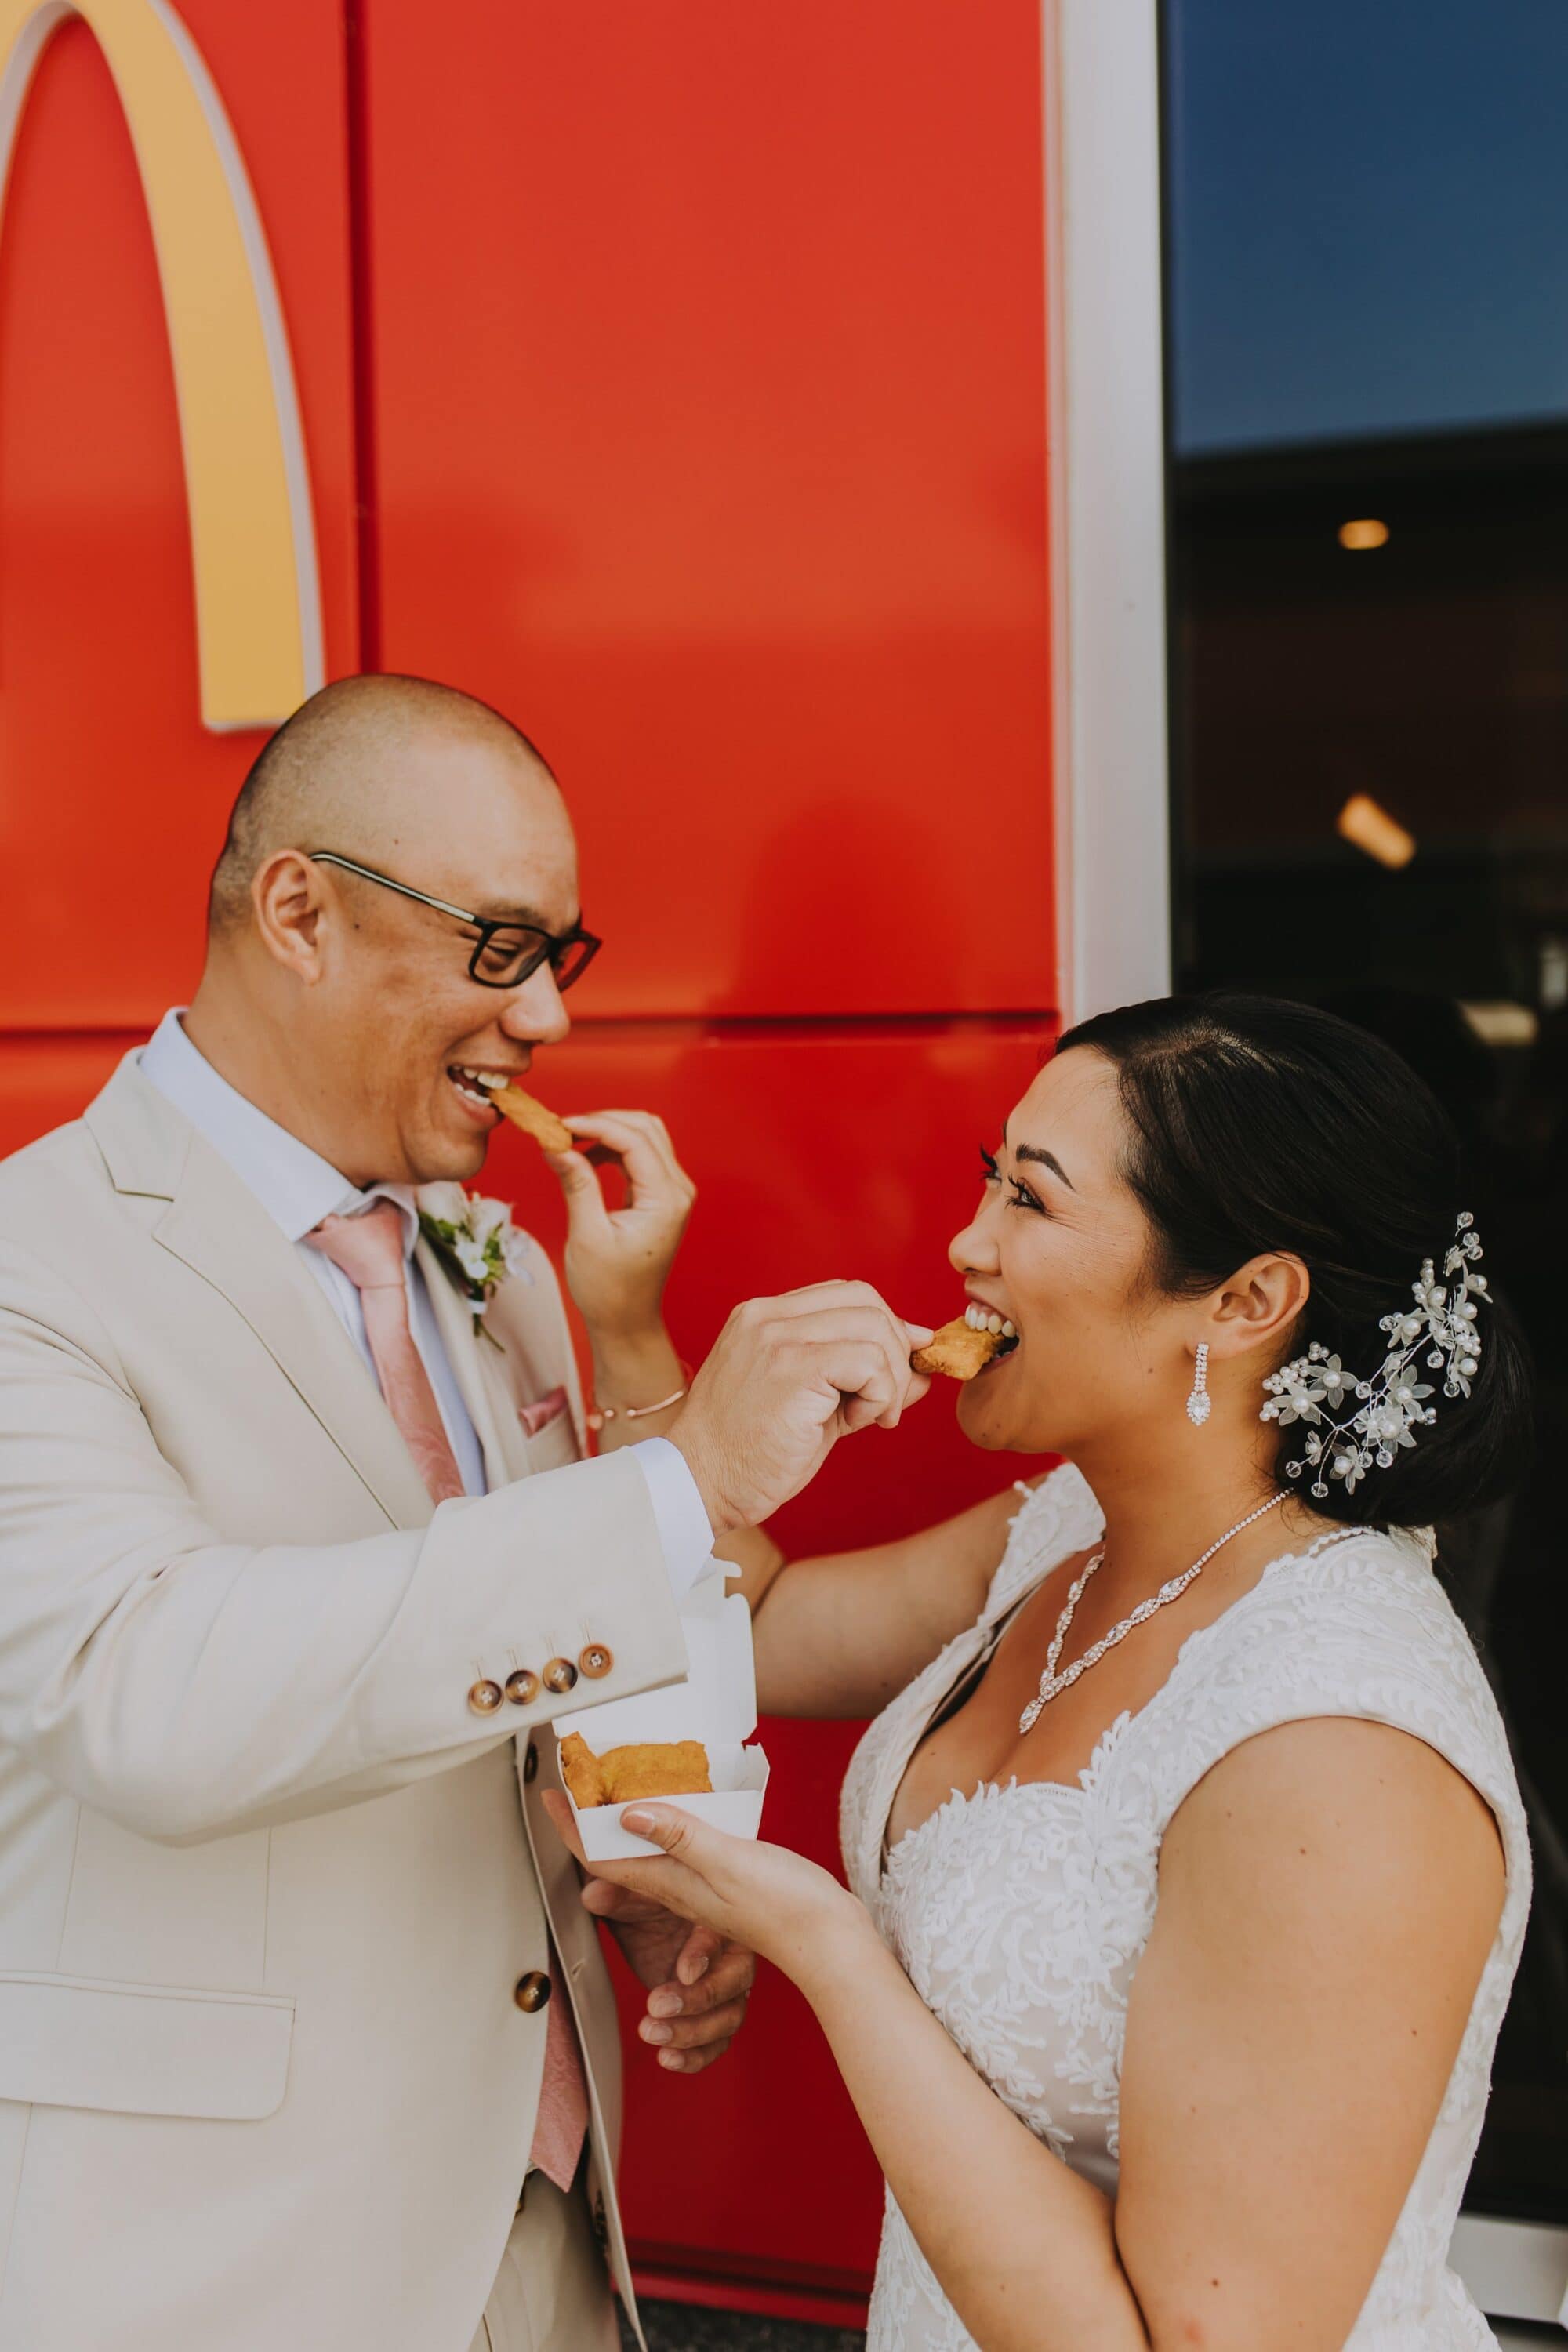 A bride and groom feeding each other chicken nuggets in front of Mcdonald's